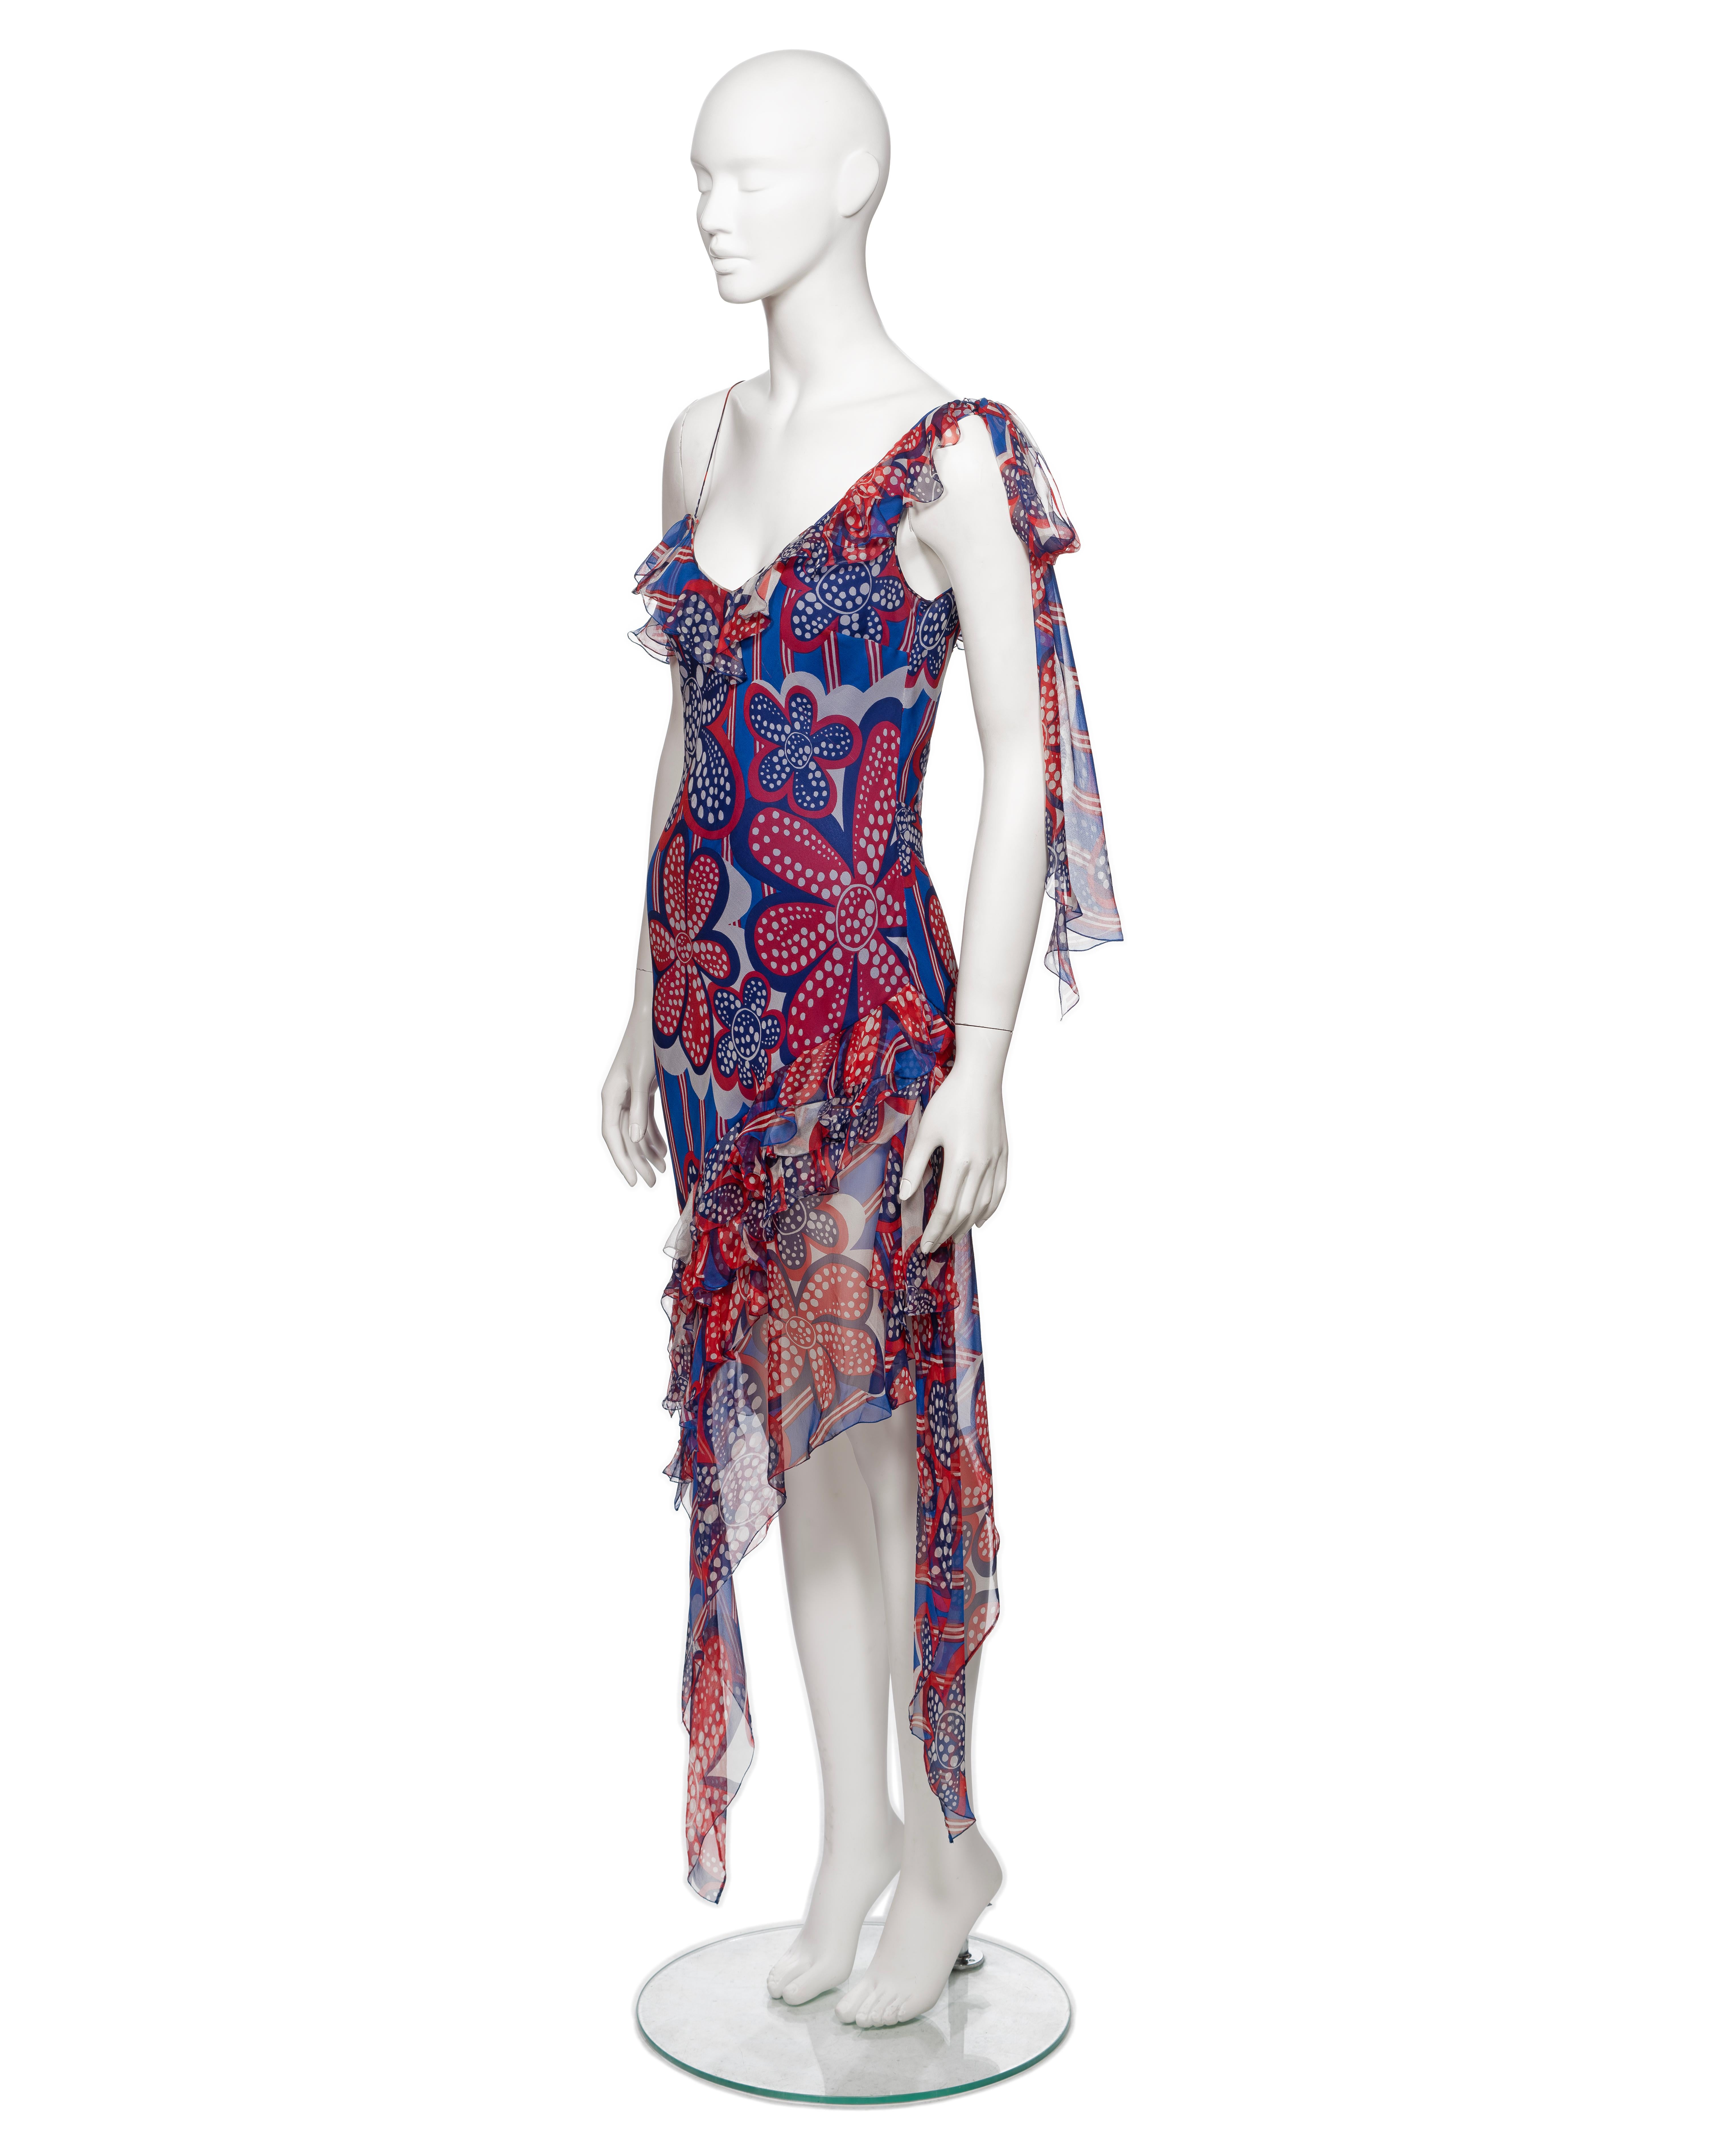 Women's John Galliano Red and Blue Floral Print Silk Chiffon Slip Dress, SS 2002 For Sale